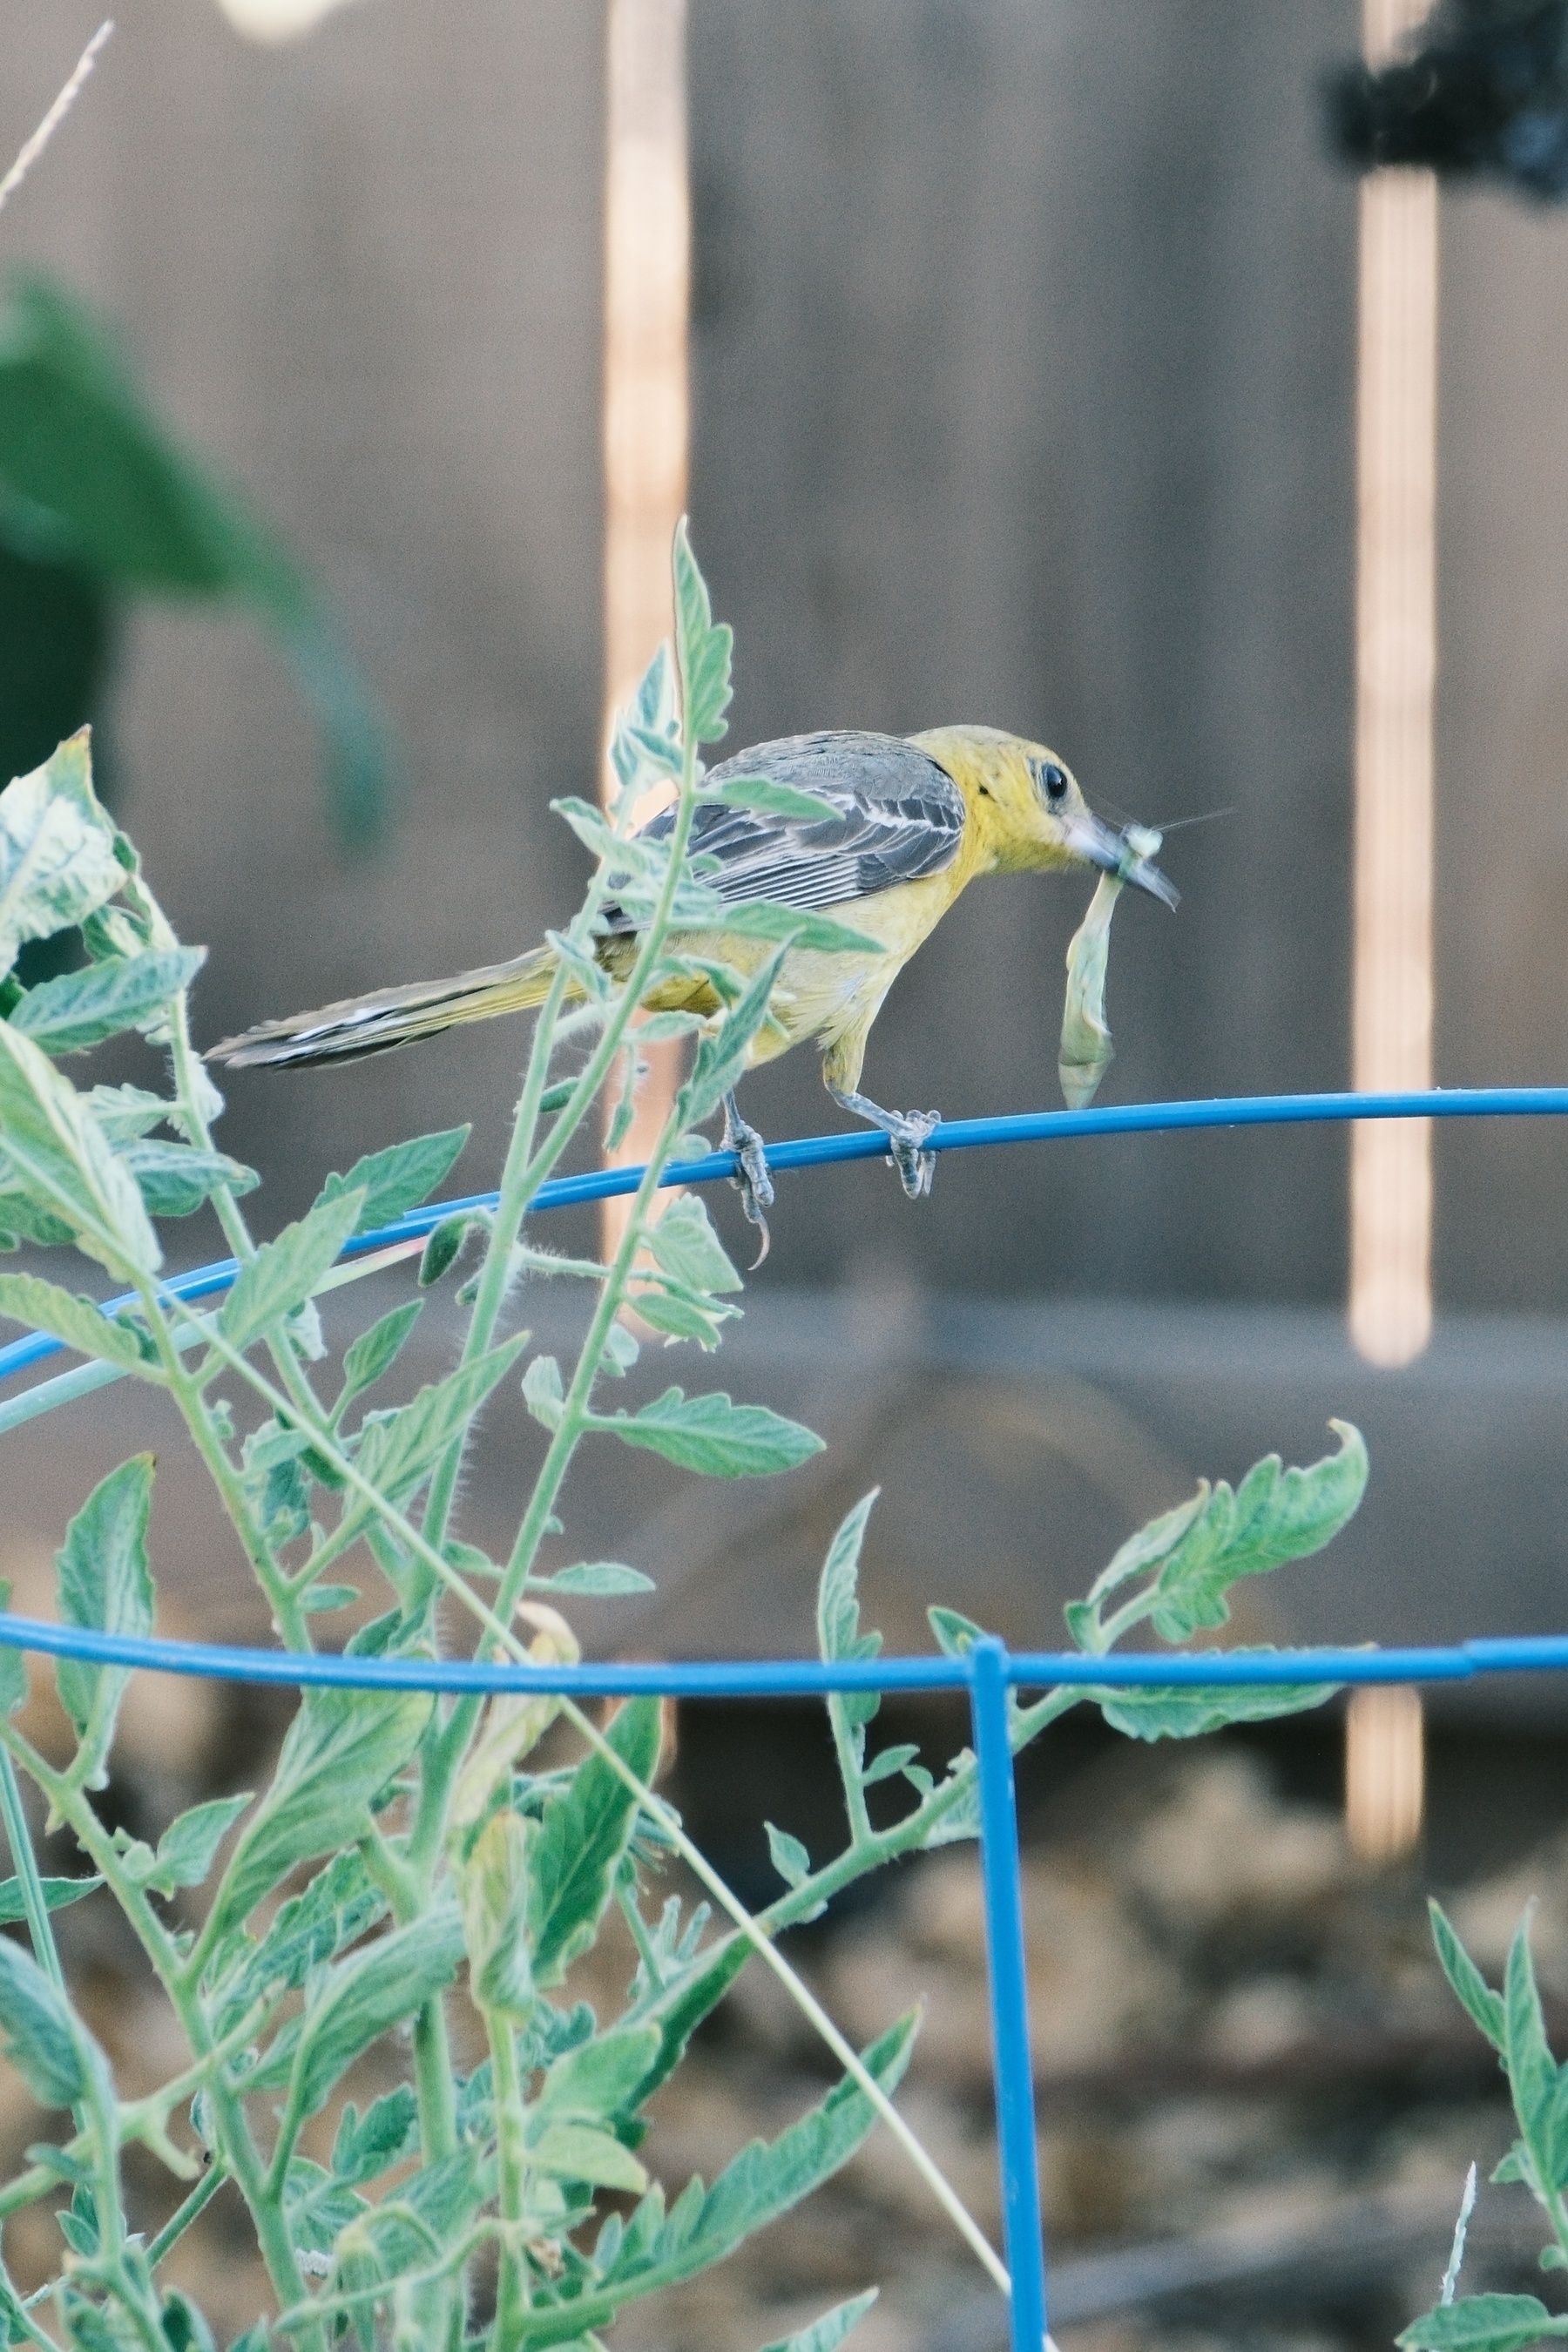 A female yellow and gray Oriole with a praying mantis in its beak. It is mostly yellow on the underside and gray on its wings. It is perched on top of a blue wire tomato cage with a tomato plant pushing through the top.